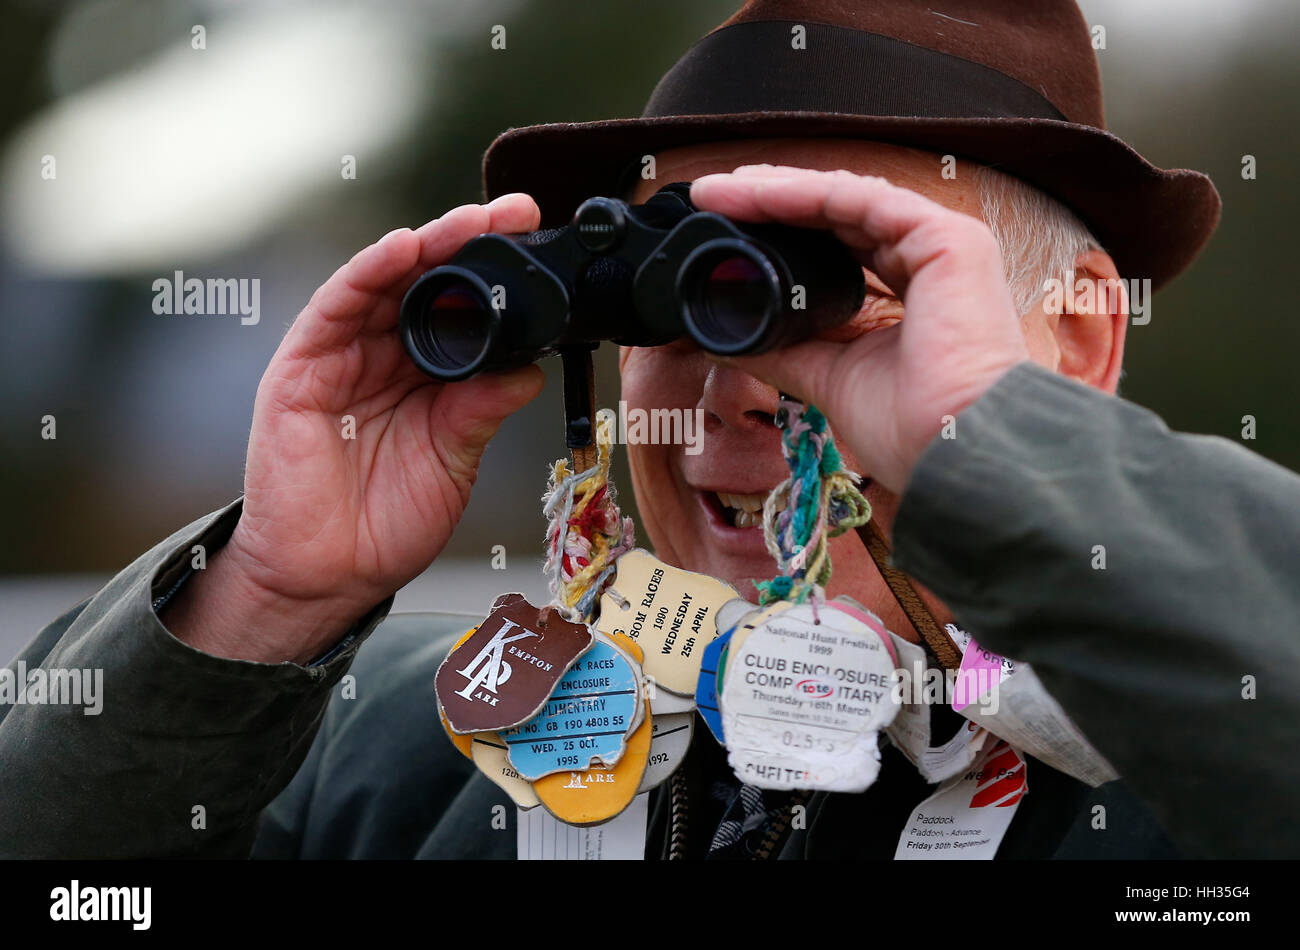 A punter watches the racing through a pair of binoculars at Plumpton Racecourse in Sussex, UK Stock Photo